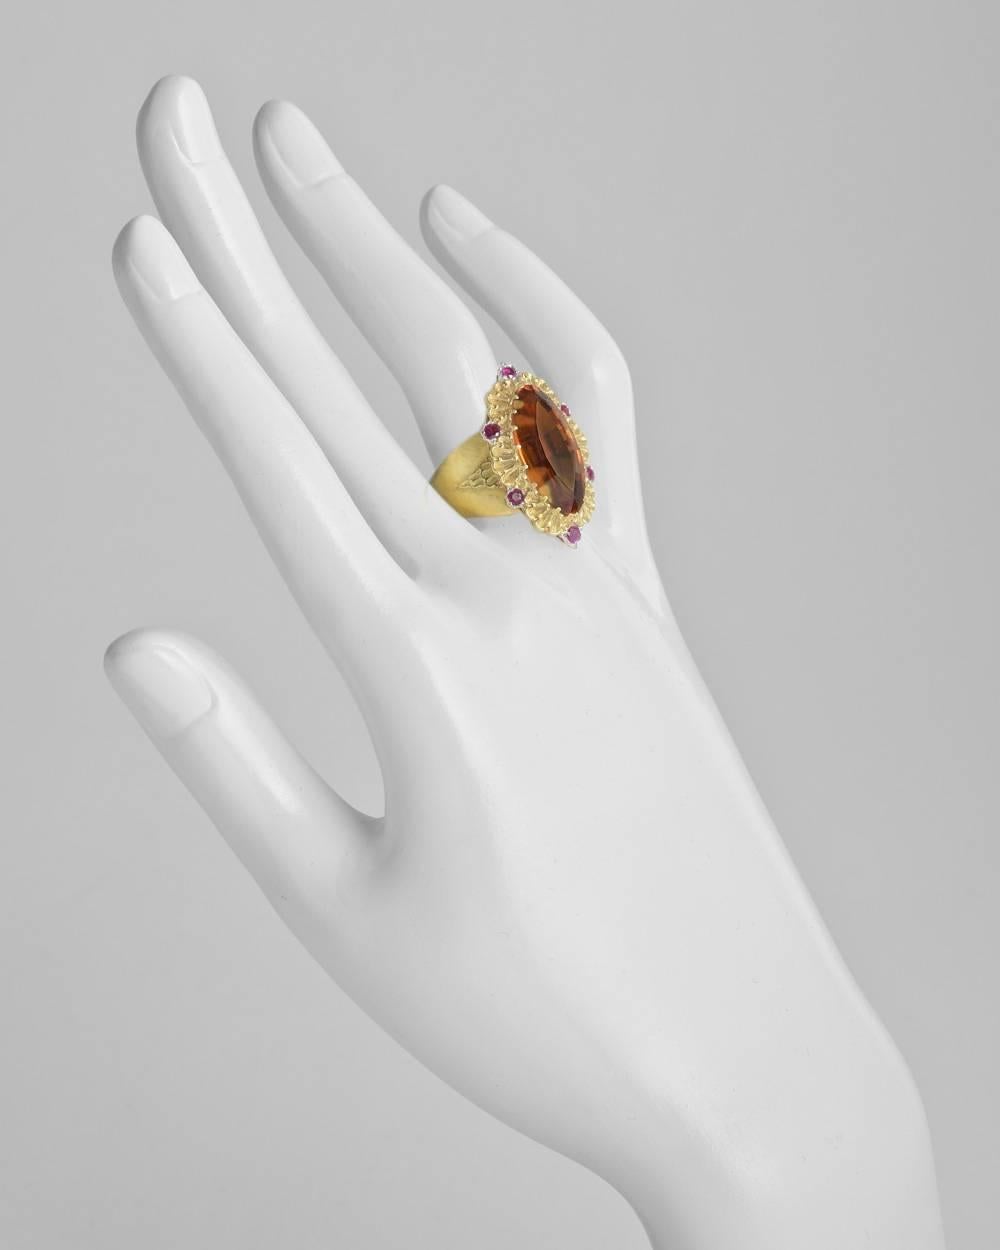 Cocktail ring, showcasing a large navette-cut Madeira citrine surrounded by six round faceted rubies weighing approximately 0.30 total carats, mounted in an elegantly engraved and textured 18k yellow and white gold setting, signed Buccellati. Ring